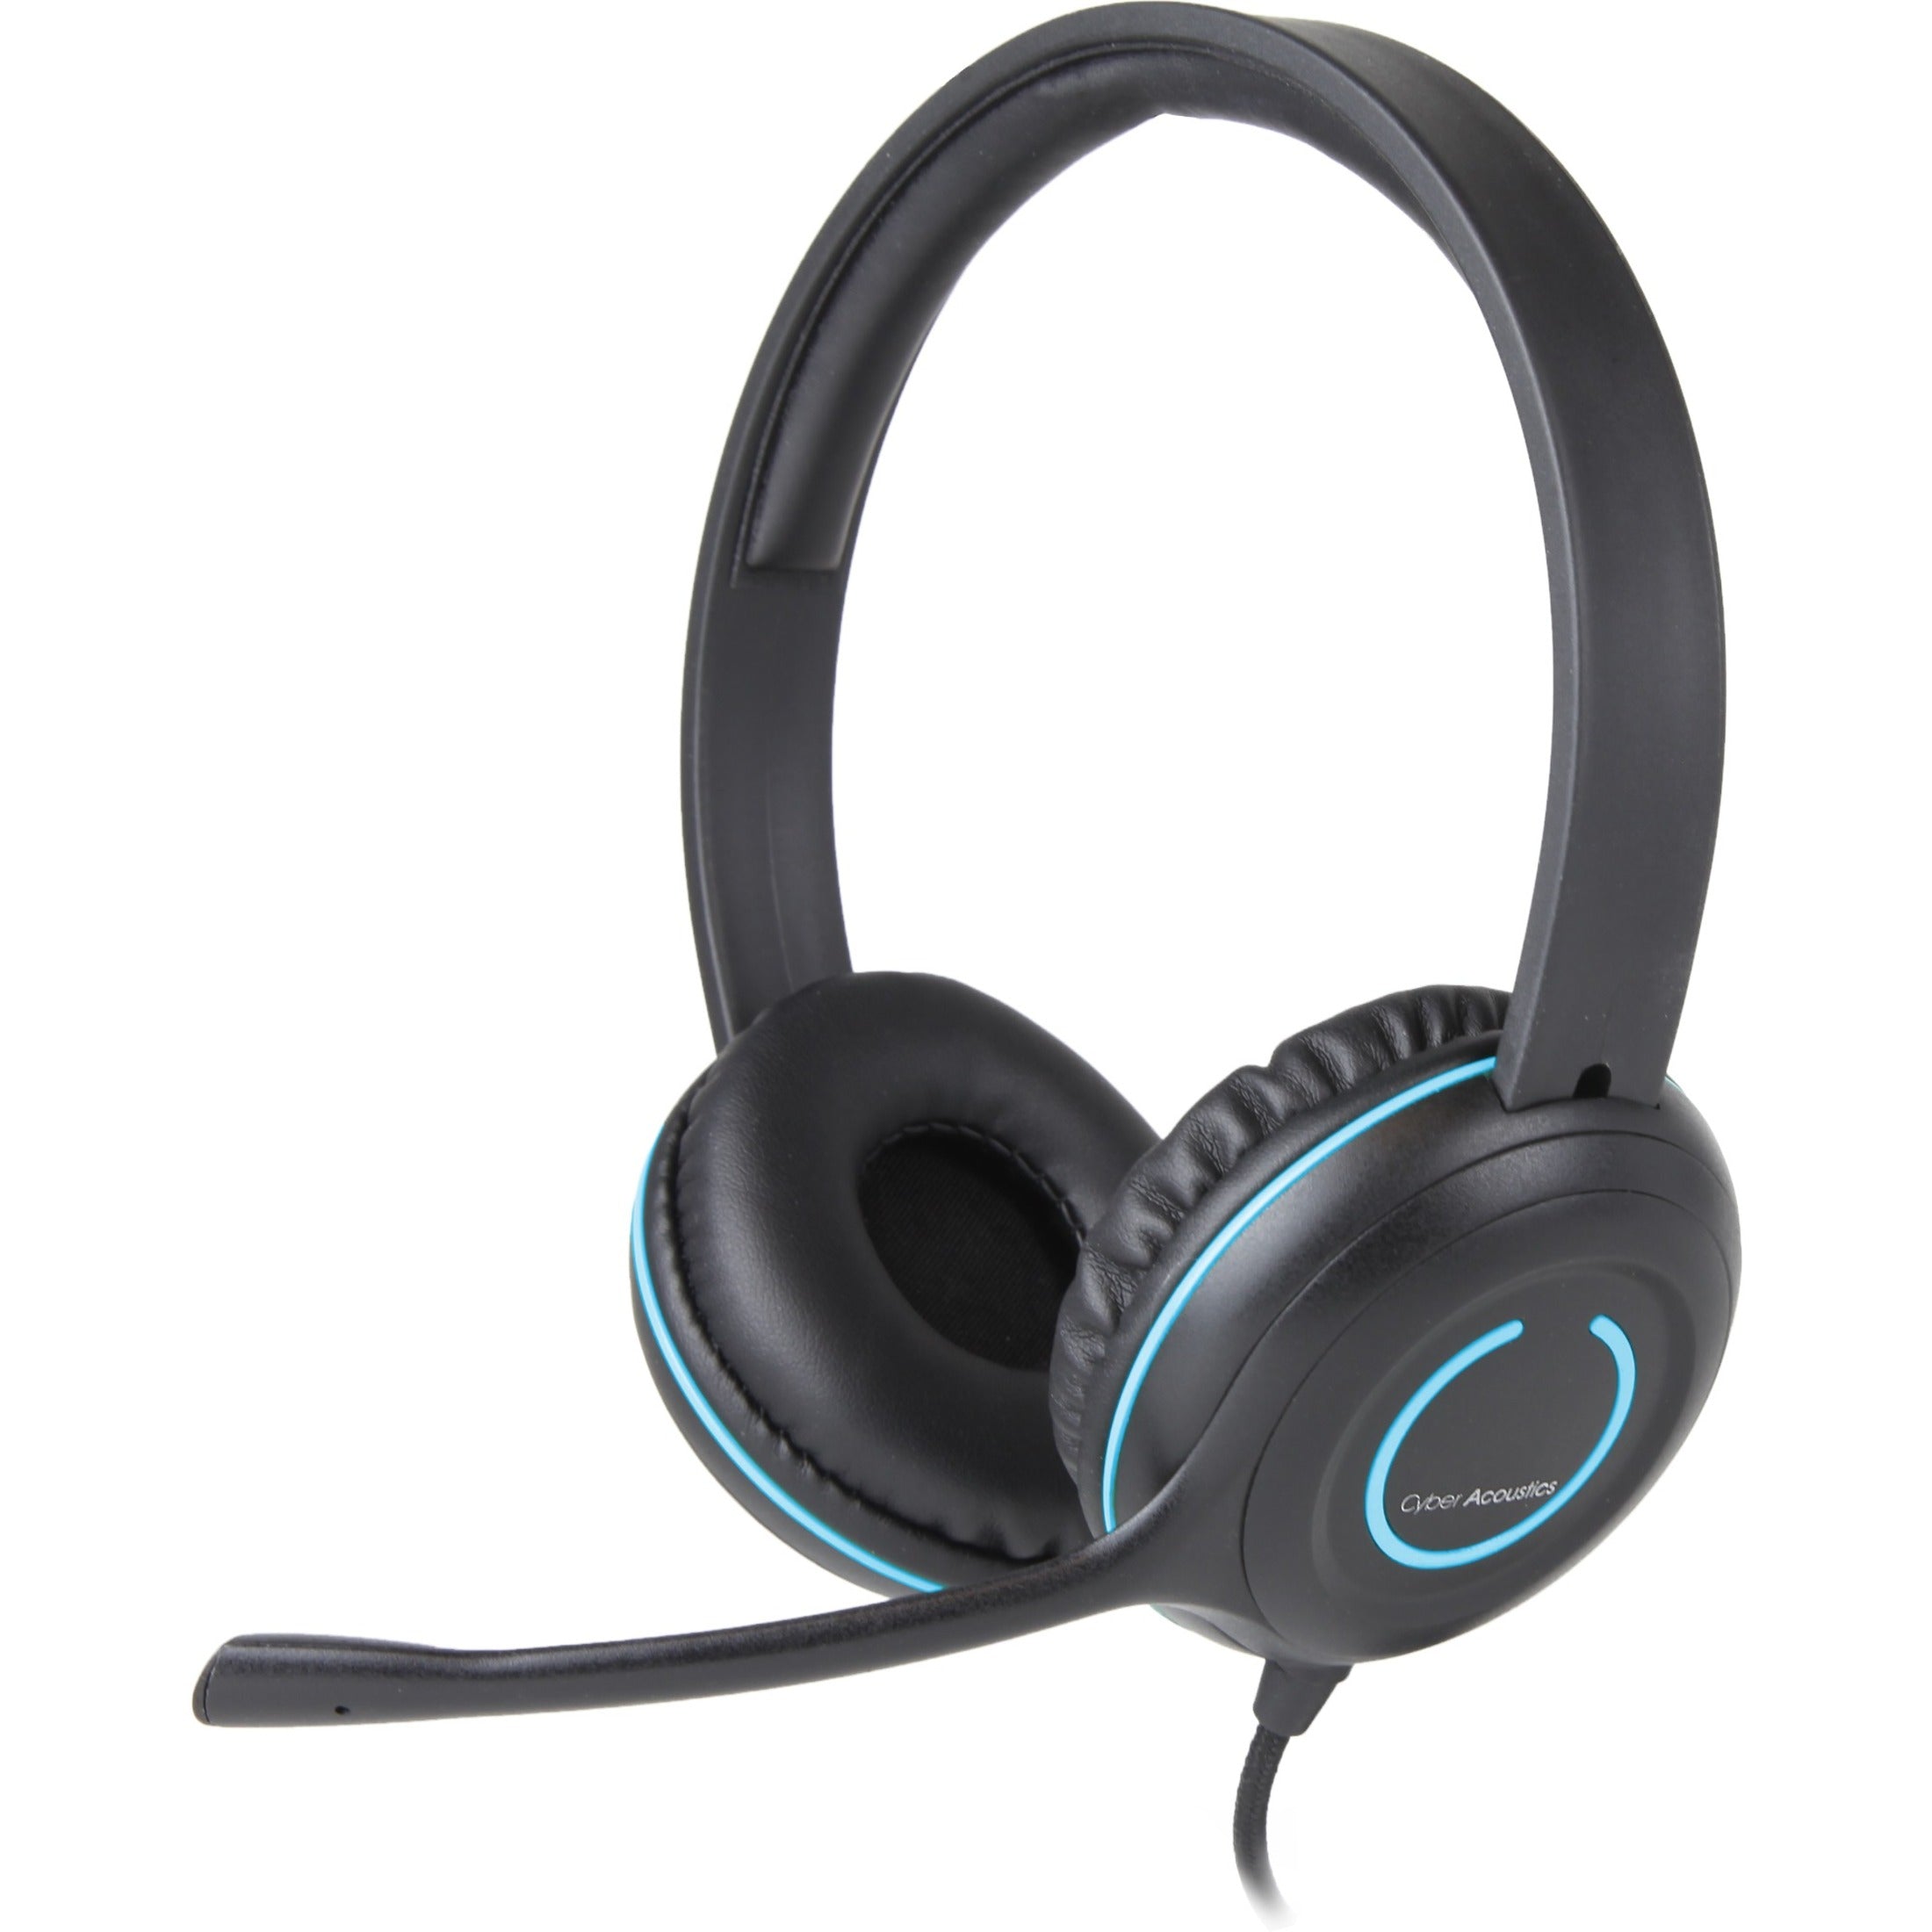 Cyber Acoustics AC-5008 USB Stereo Headset Durable Adjustable Headband Noise Cancelling